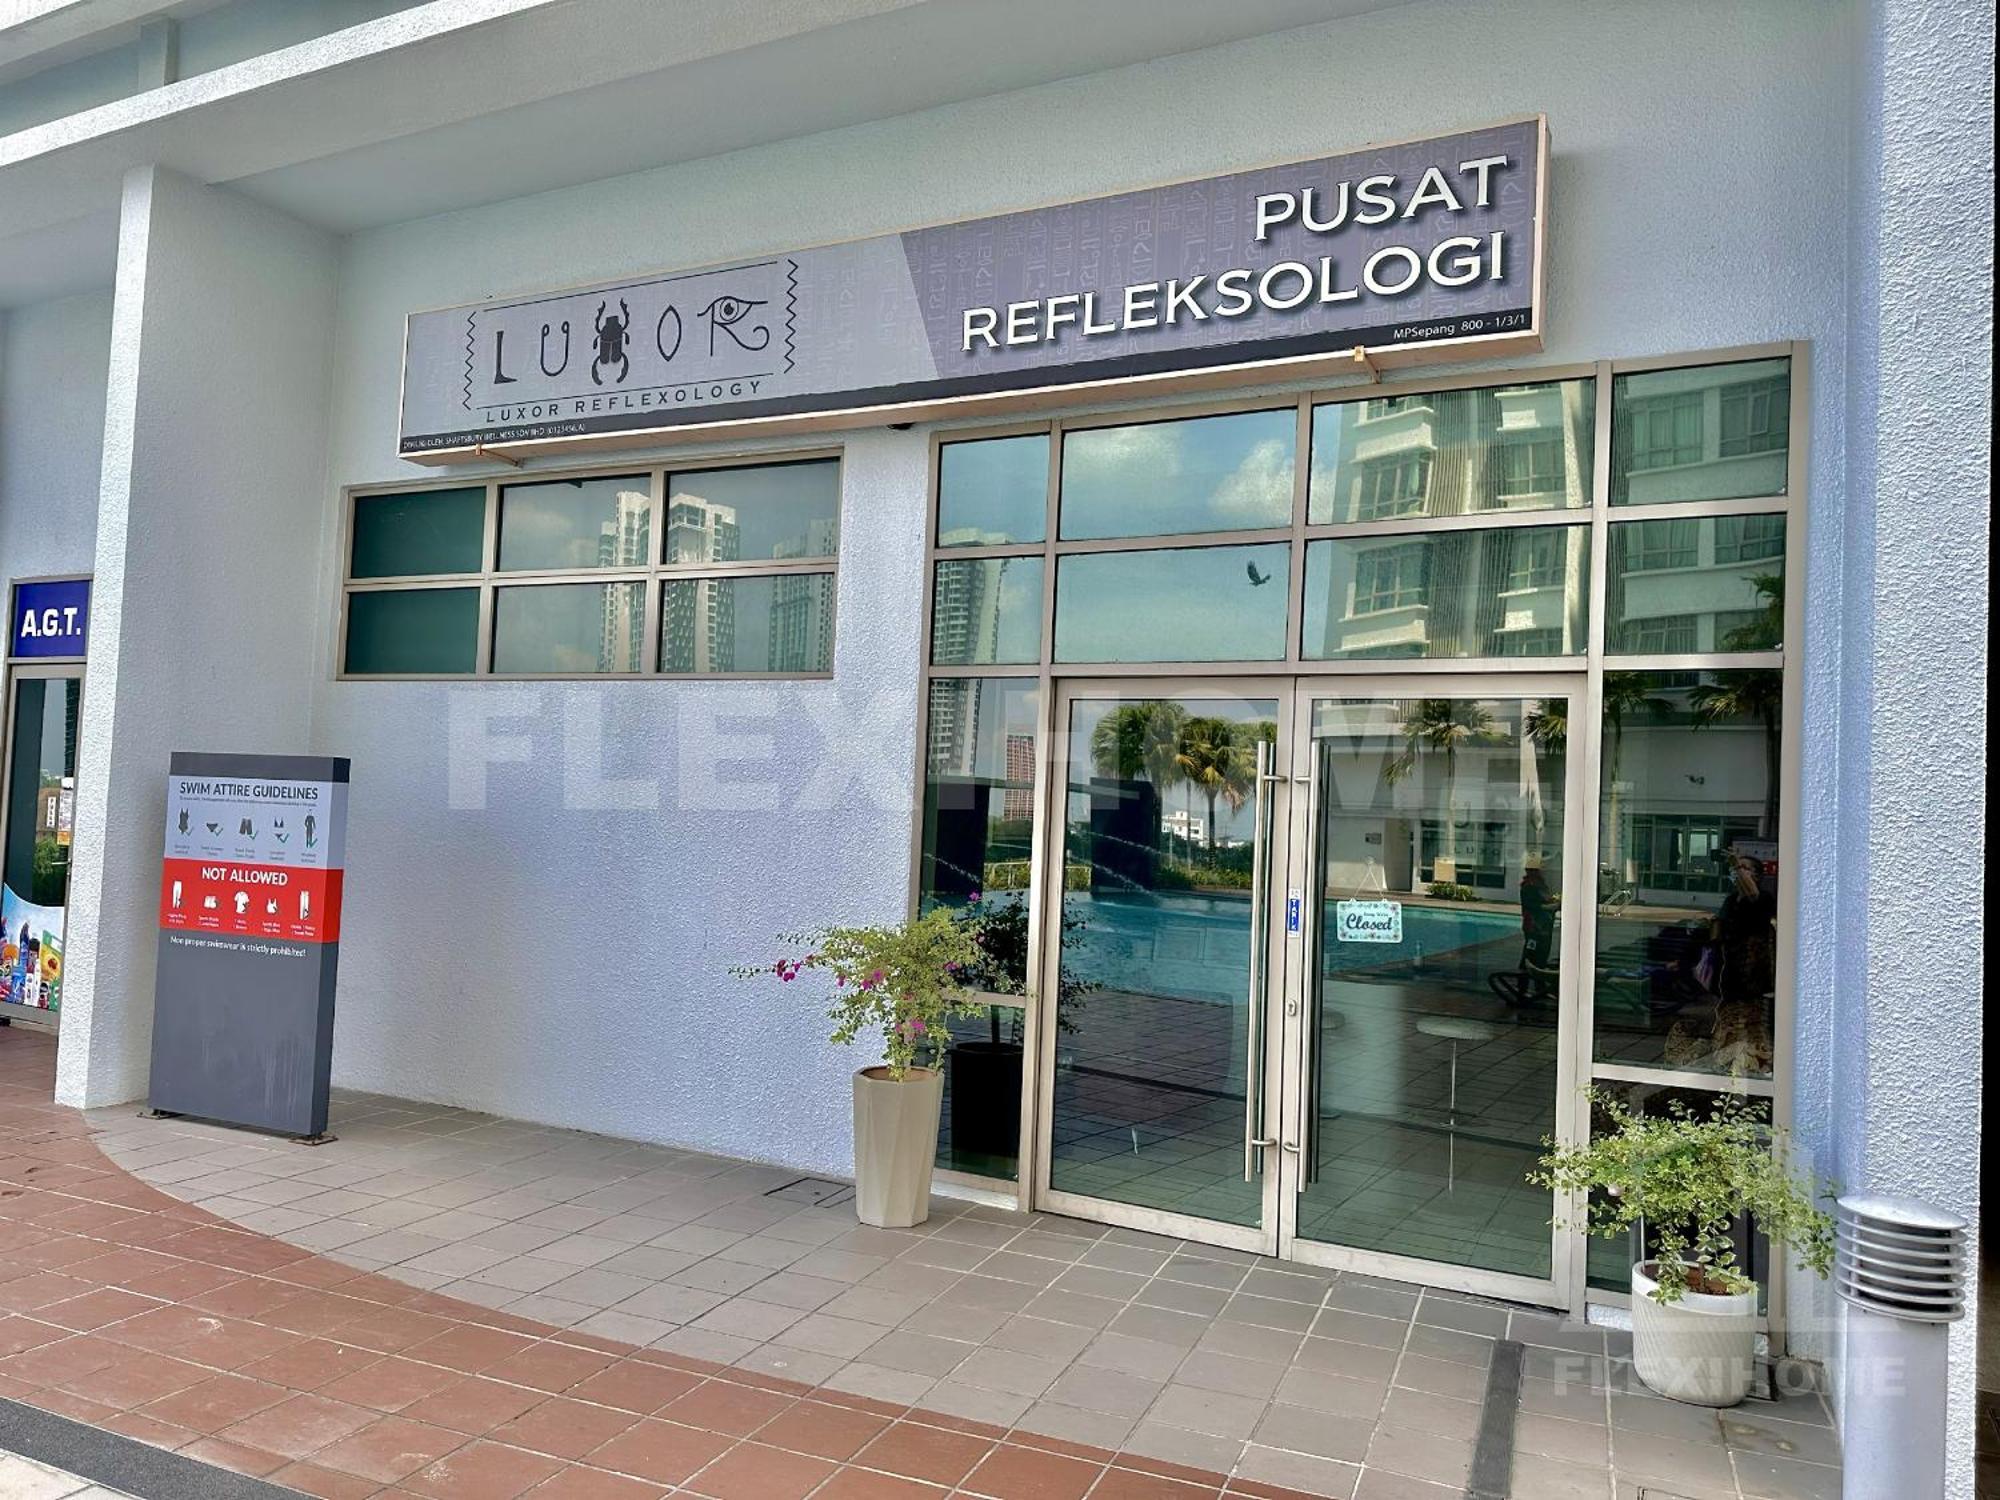 9Am-5Pm, Same Day Check In And Check Out, Work From Home, Shaftsbury-Cyberjaya, Comfy Home By Flexihome-My Exterior photo